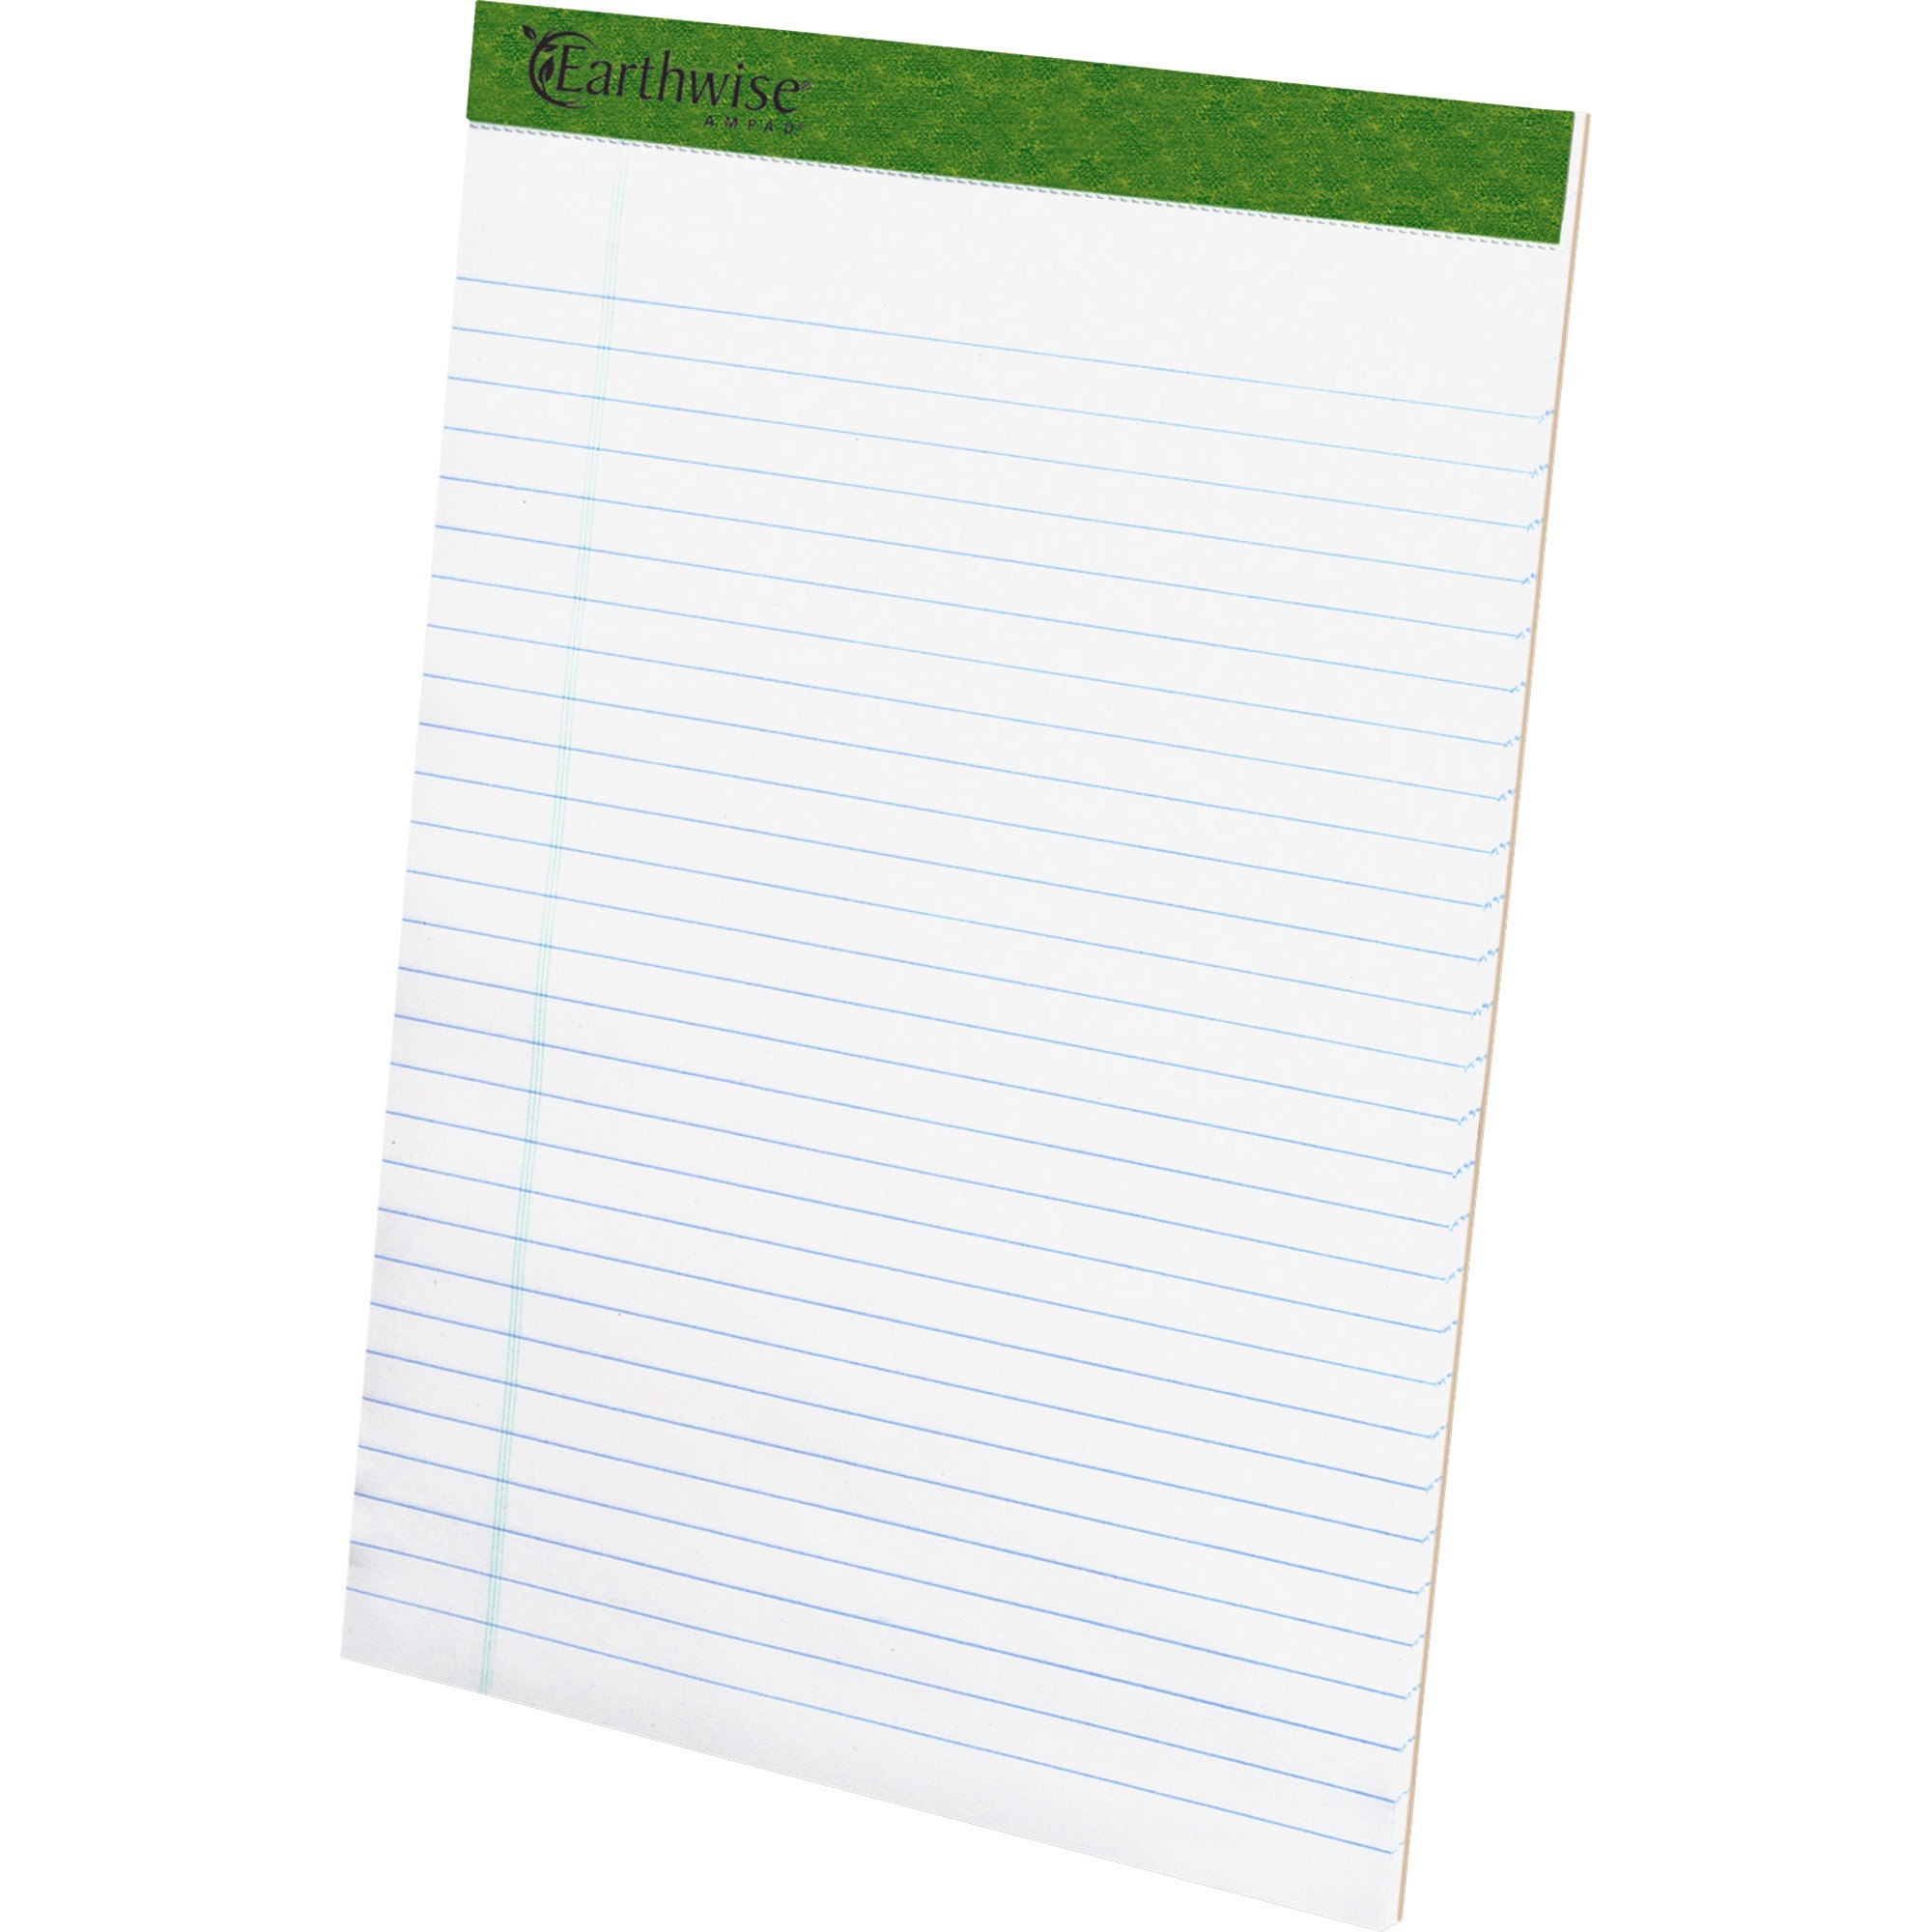 TOPS Recycled Perforated Legal Writing Pads - 50 Sheets - 0.34" Ruled - 15 lb Basis Weight - 8 1/2" x 11 3/4" - Environmentally 